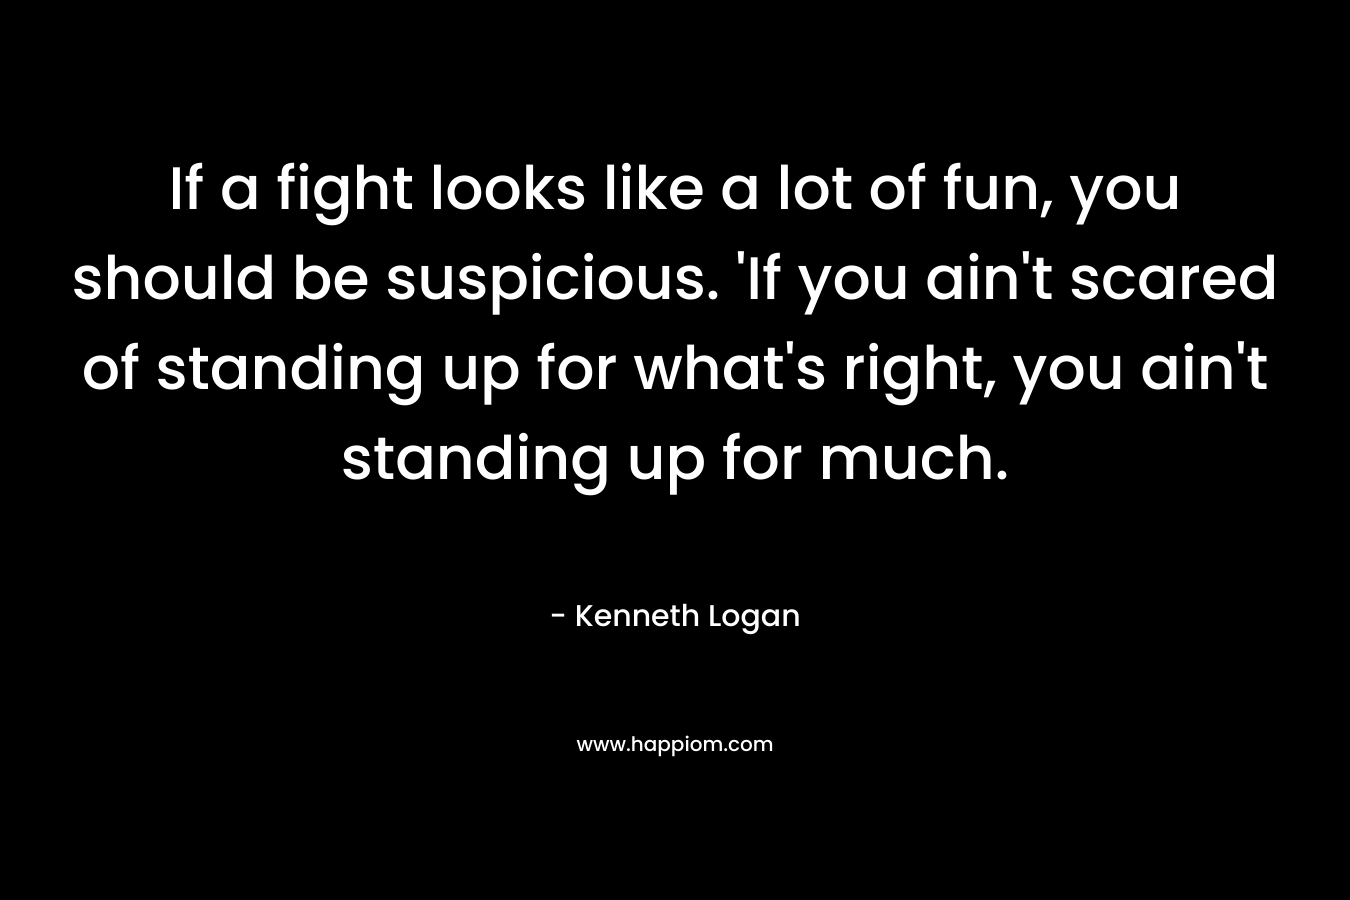 If a fight looks like a lot of fun, you should be suspicious. 'If you ain't scared of standing up for what's right, you ain't standing up for much.